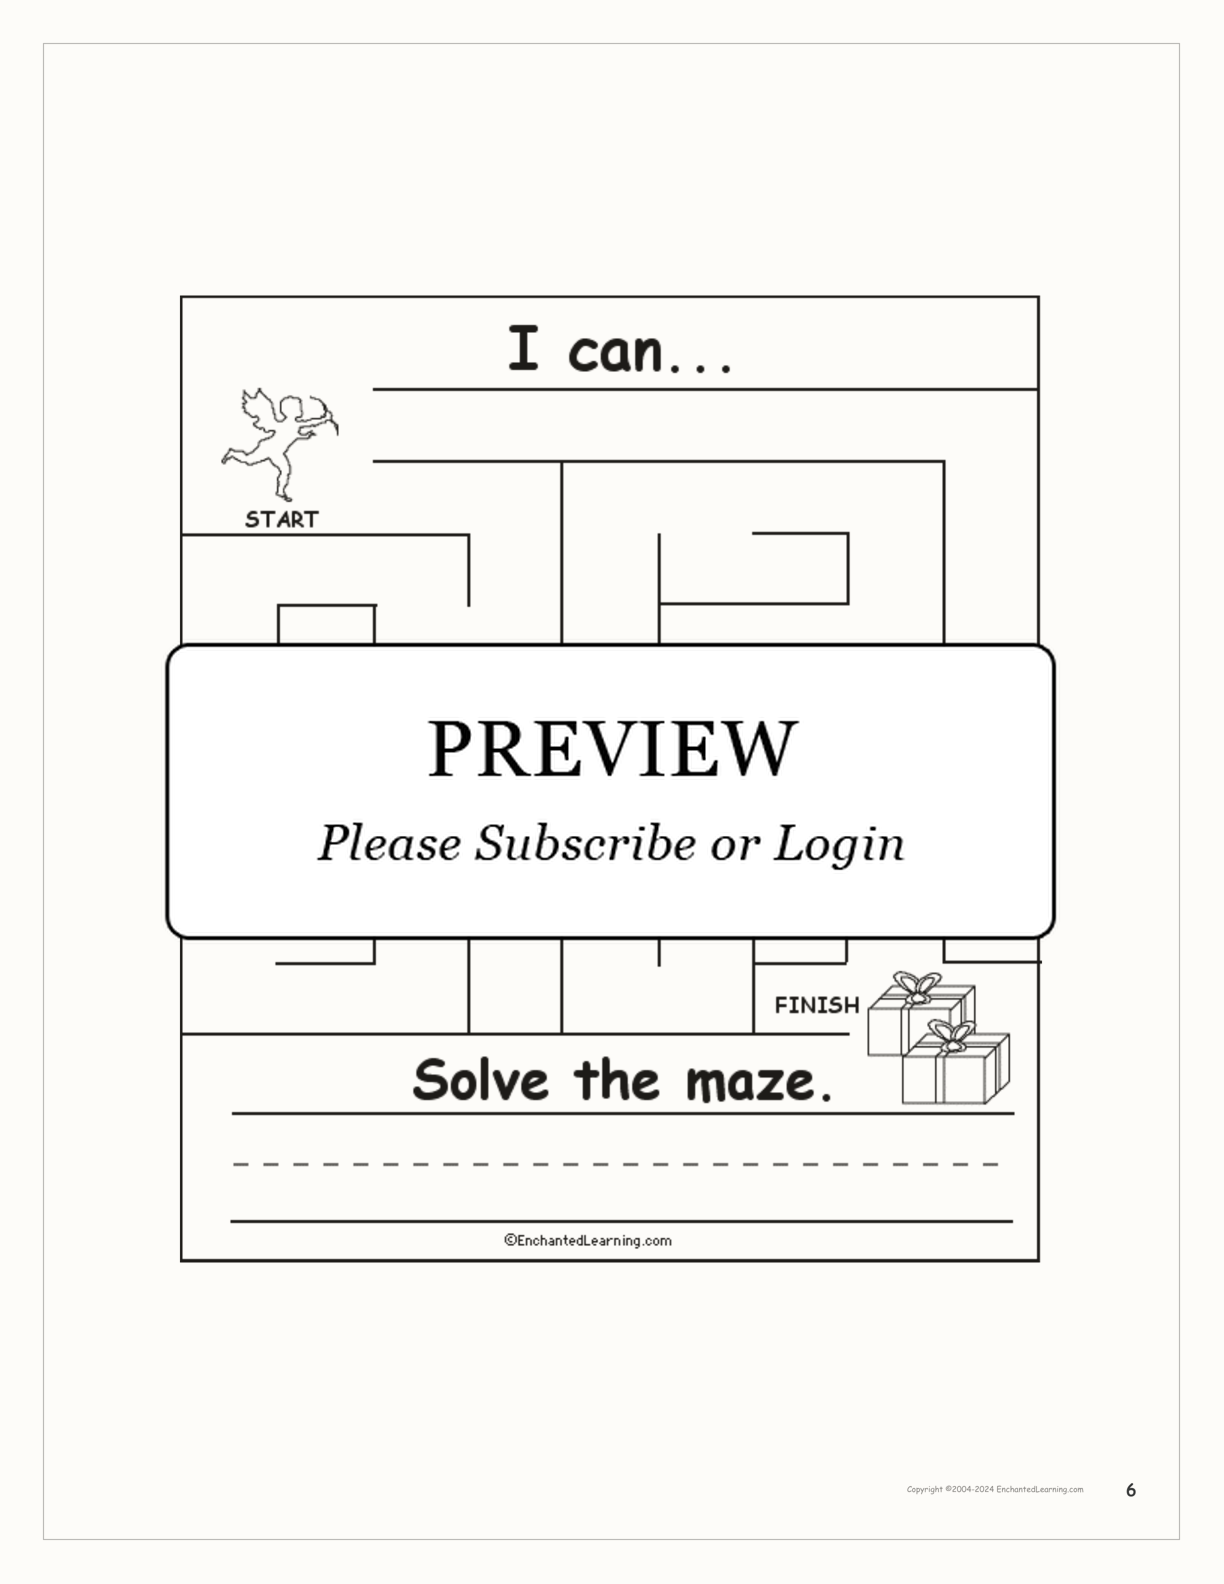 Valentine's Day 'I Can' Book interactive worksheet page 6